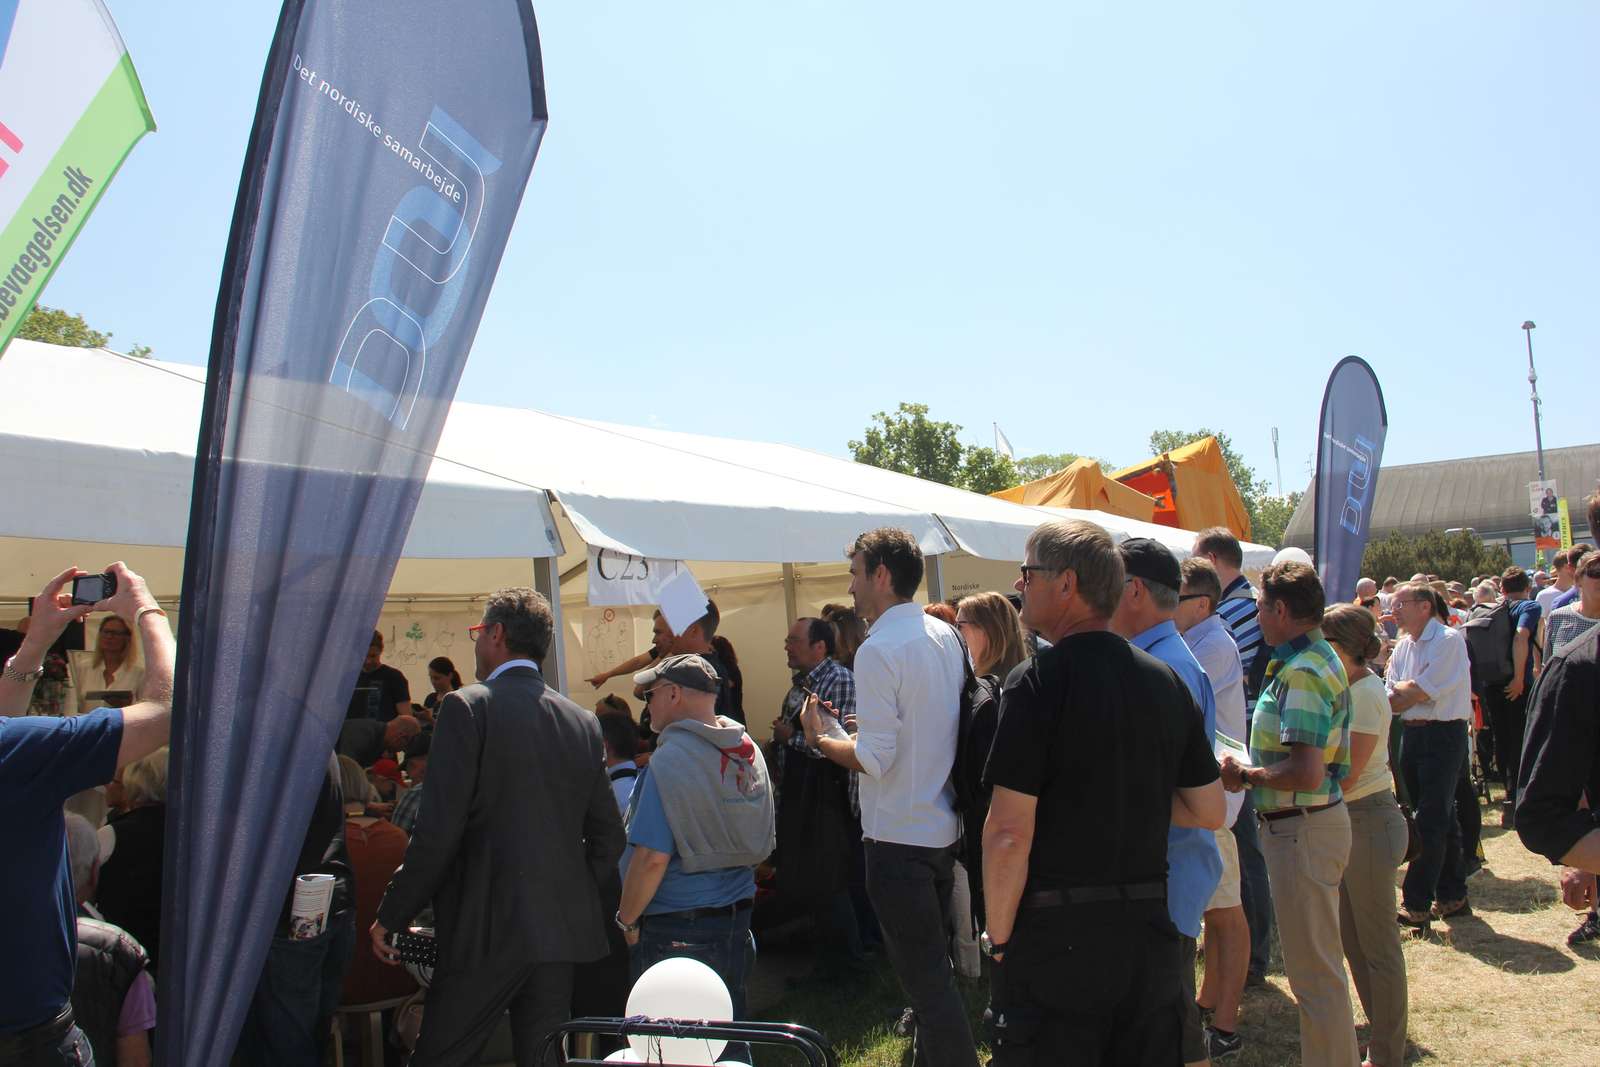 People gathered at the Nordic tent at the people's meeting Bornholm 2015